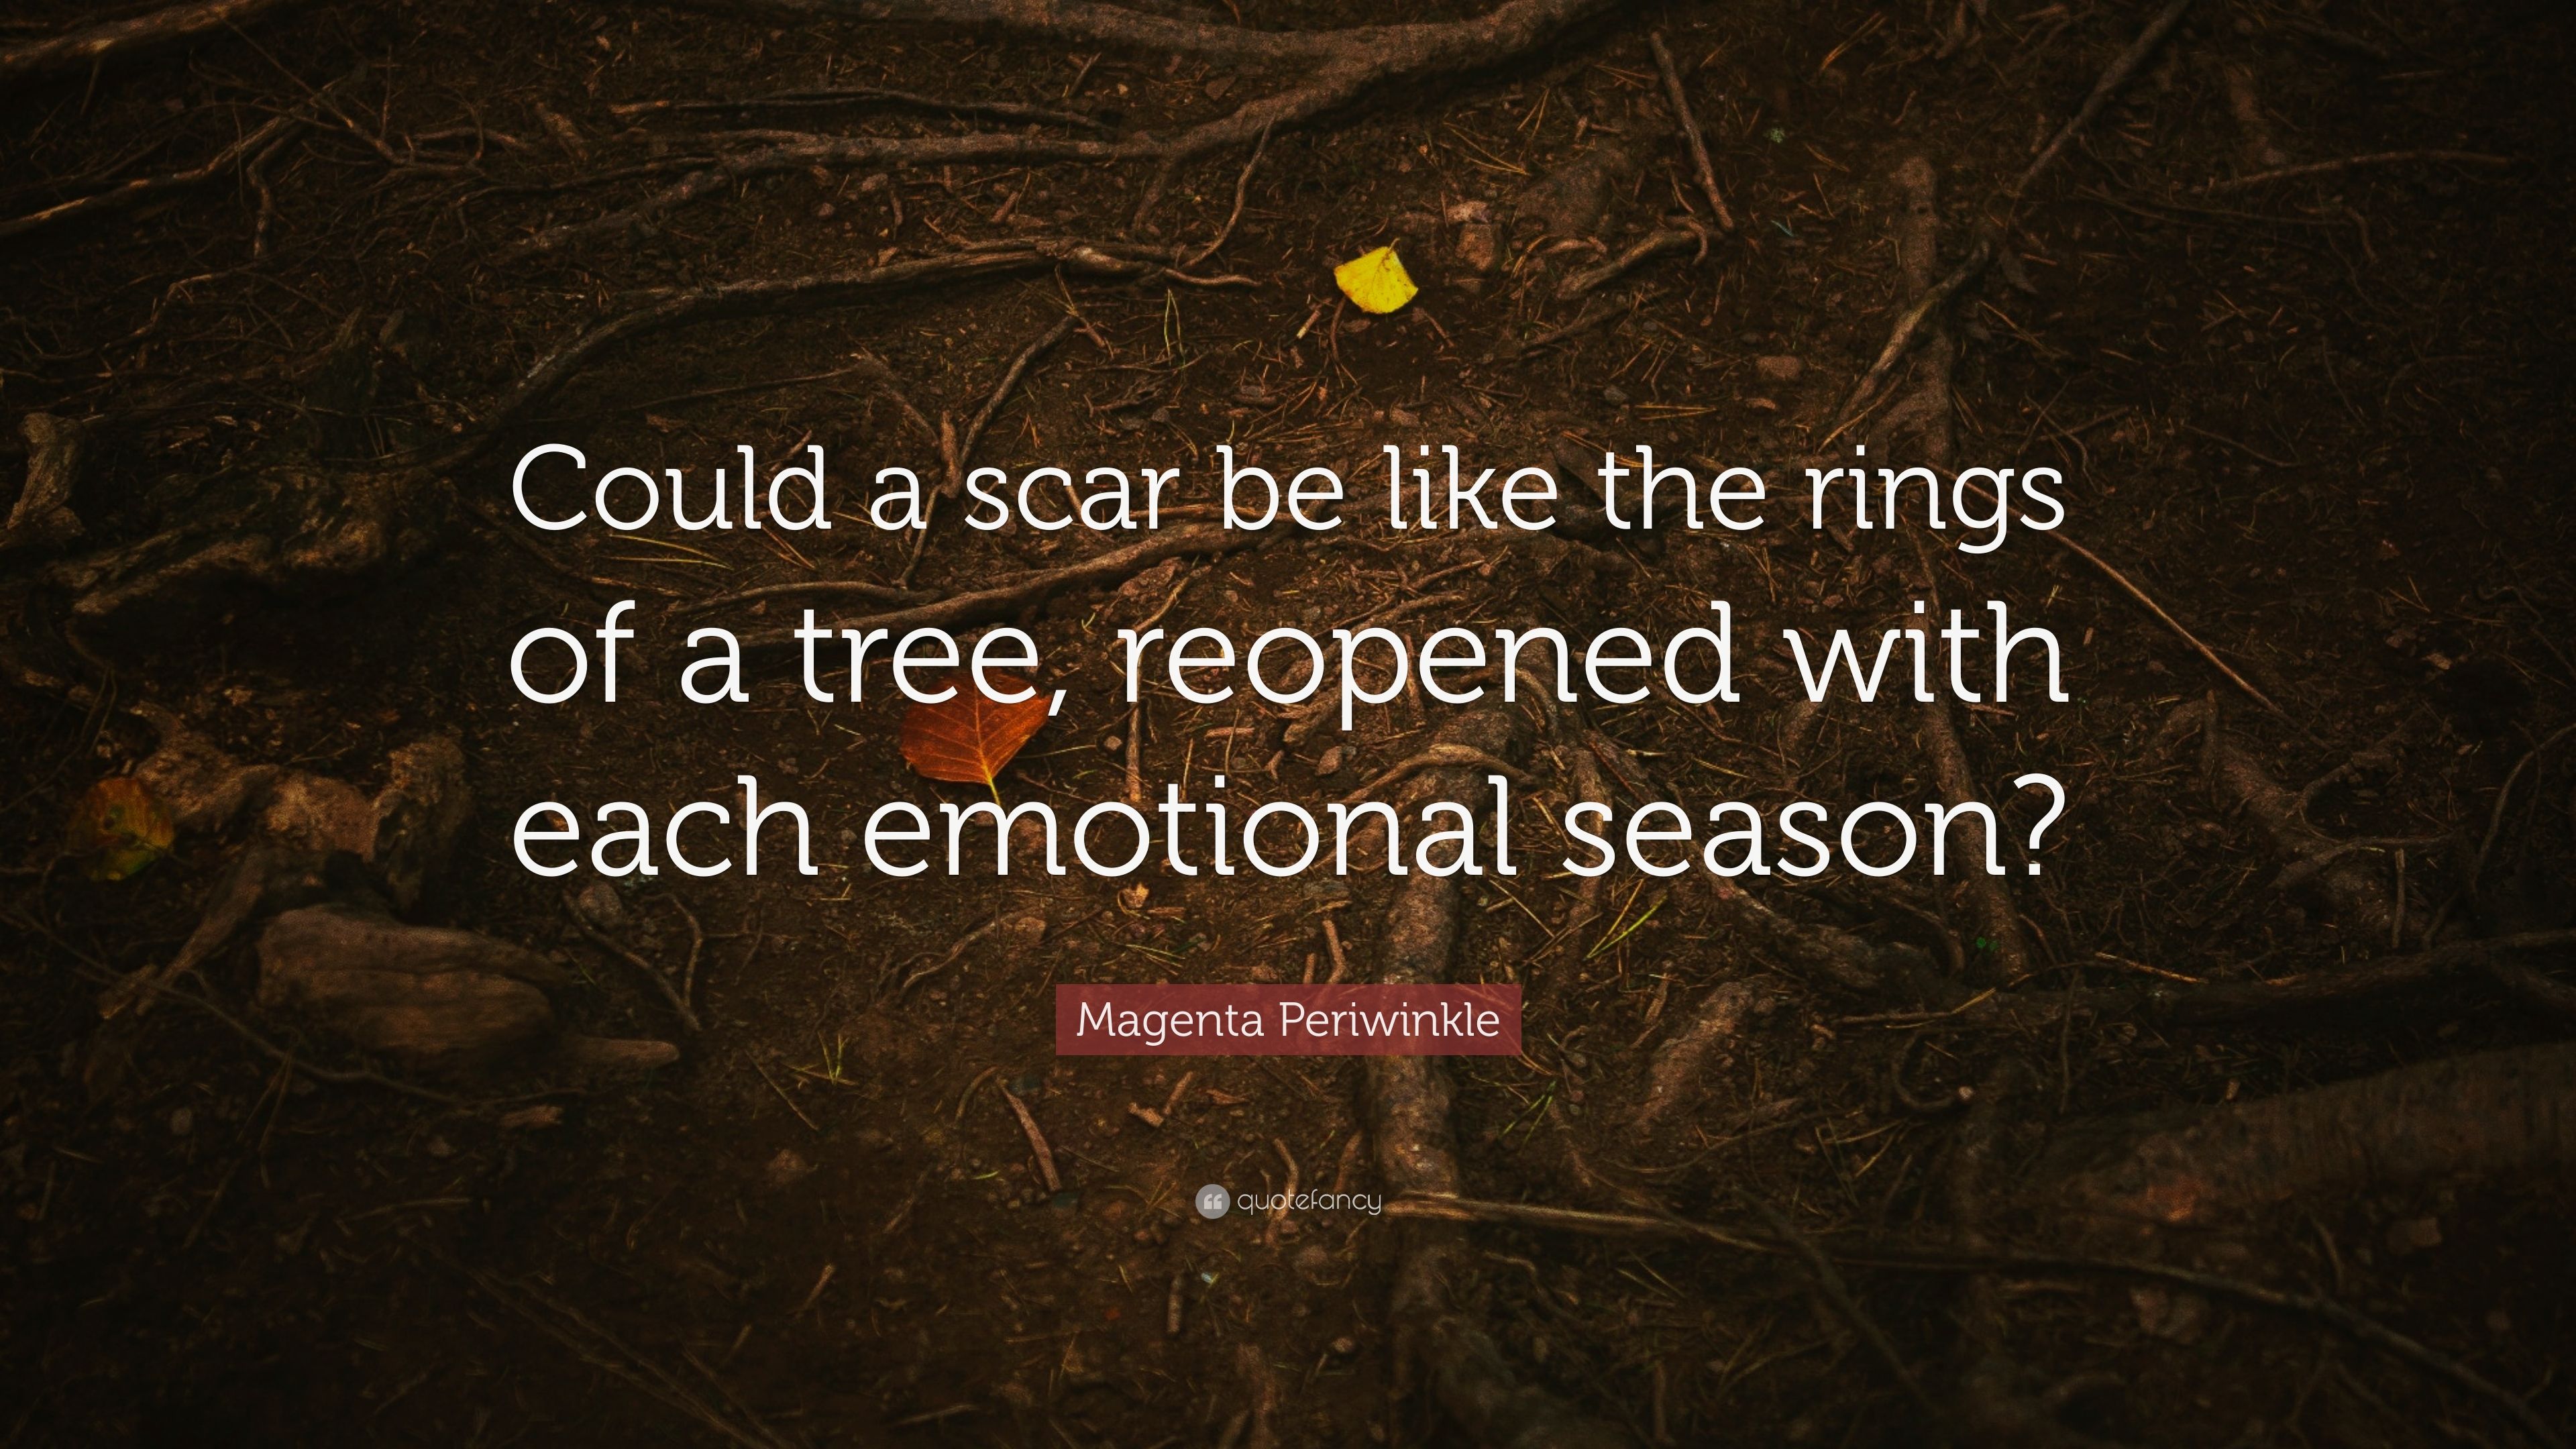 4870929-Magenta-Periwinkle-Quote-Could-a-scar-be-like-the-rings-of-a-tree